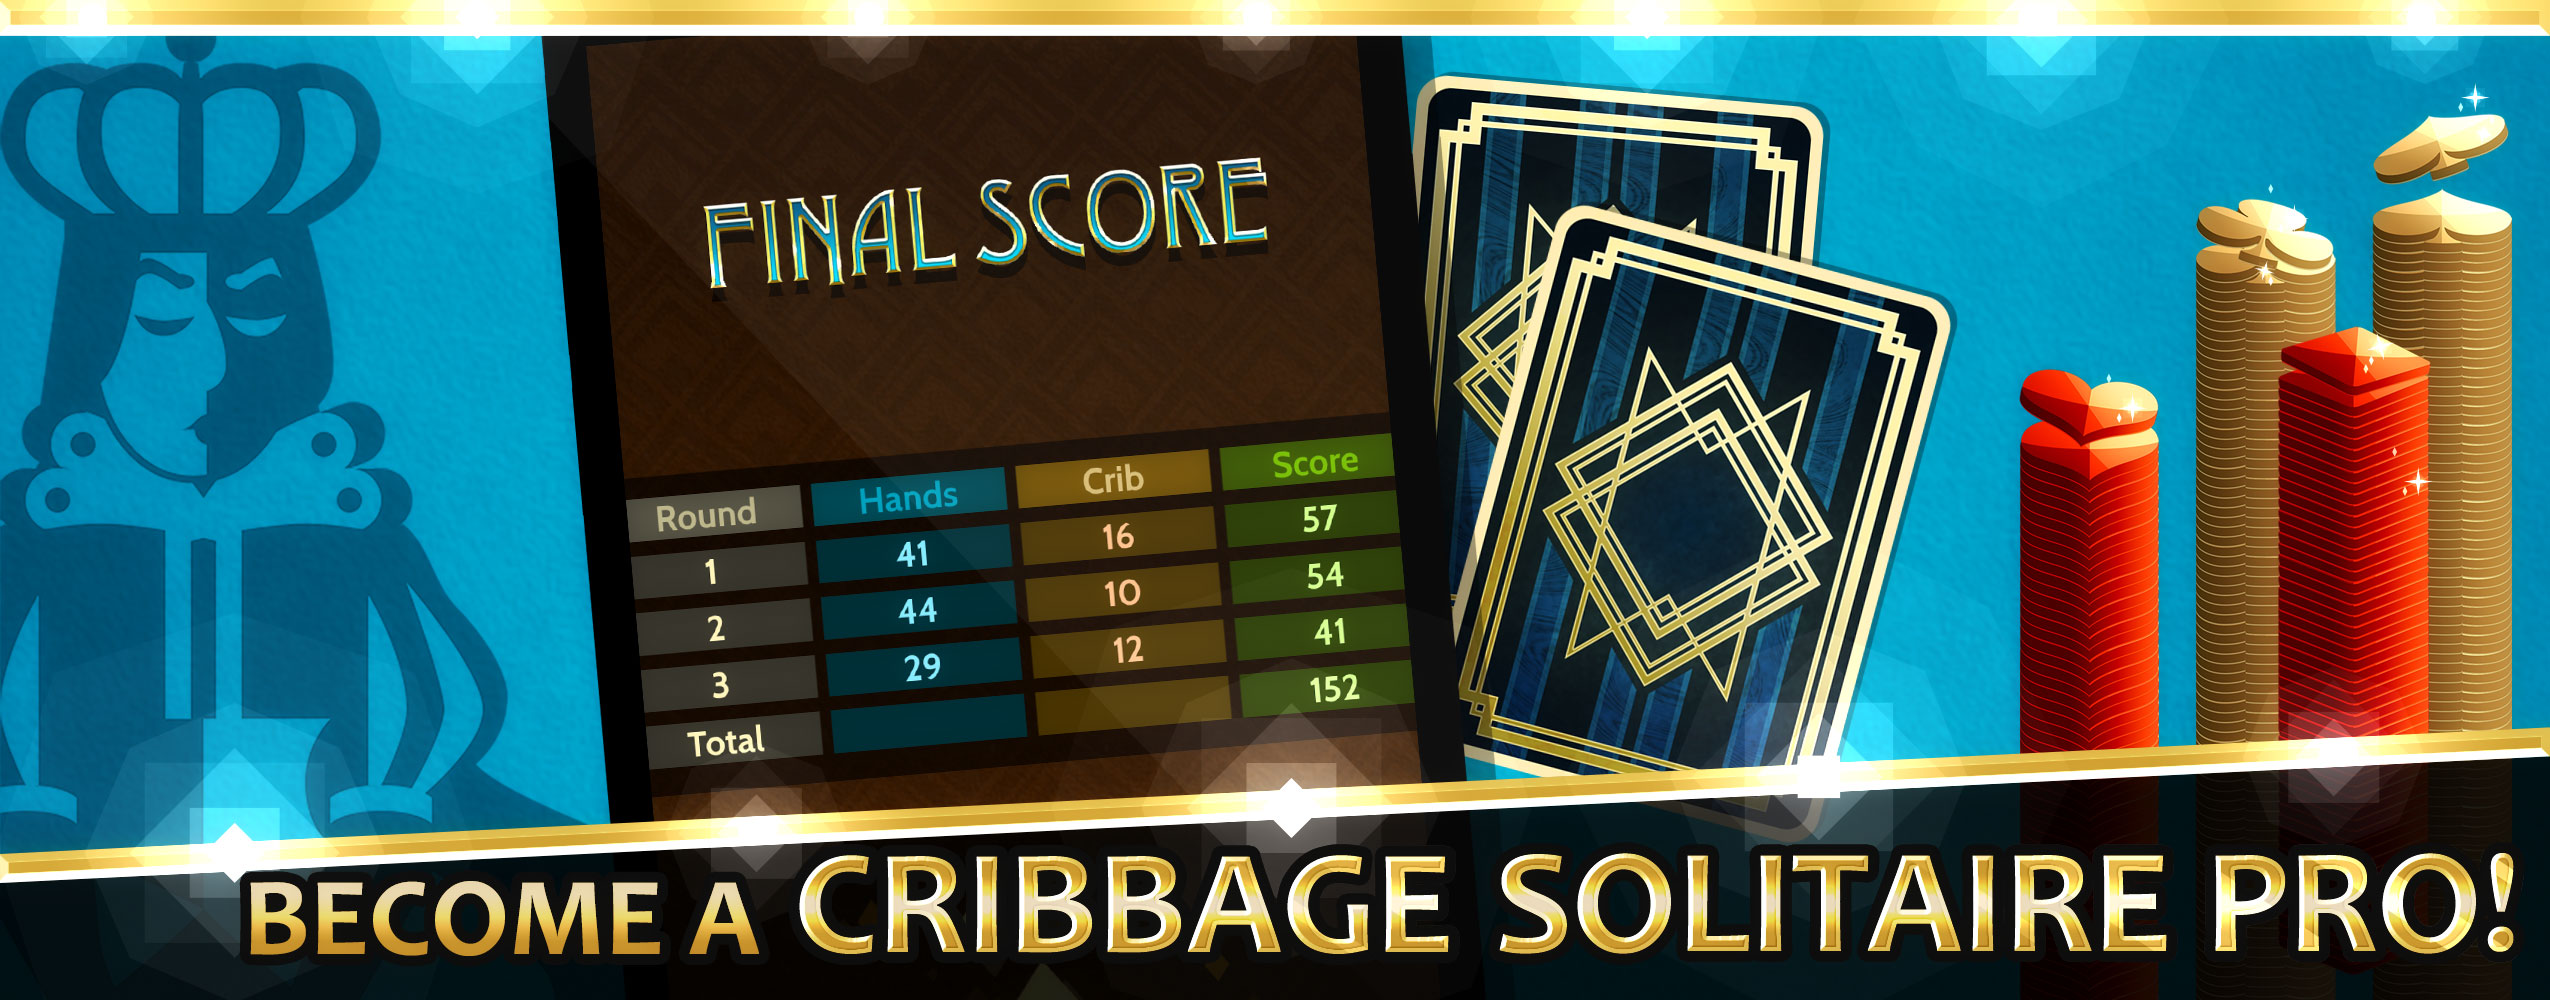 Become a Cribbage Solitaire Pro!